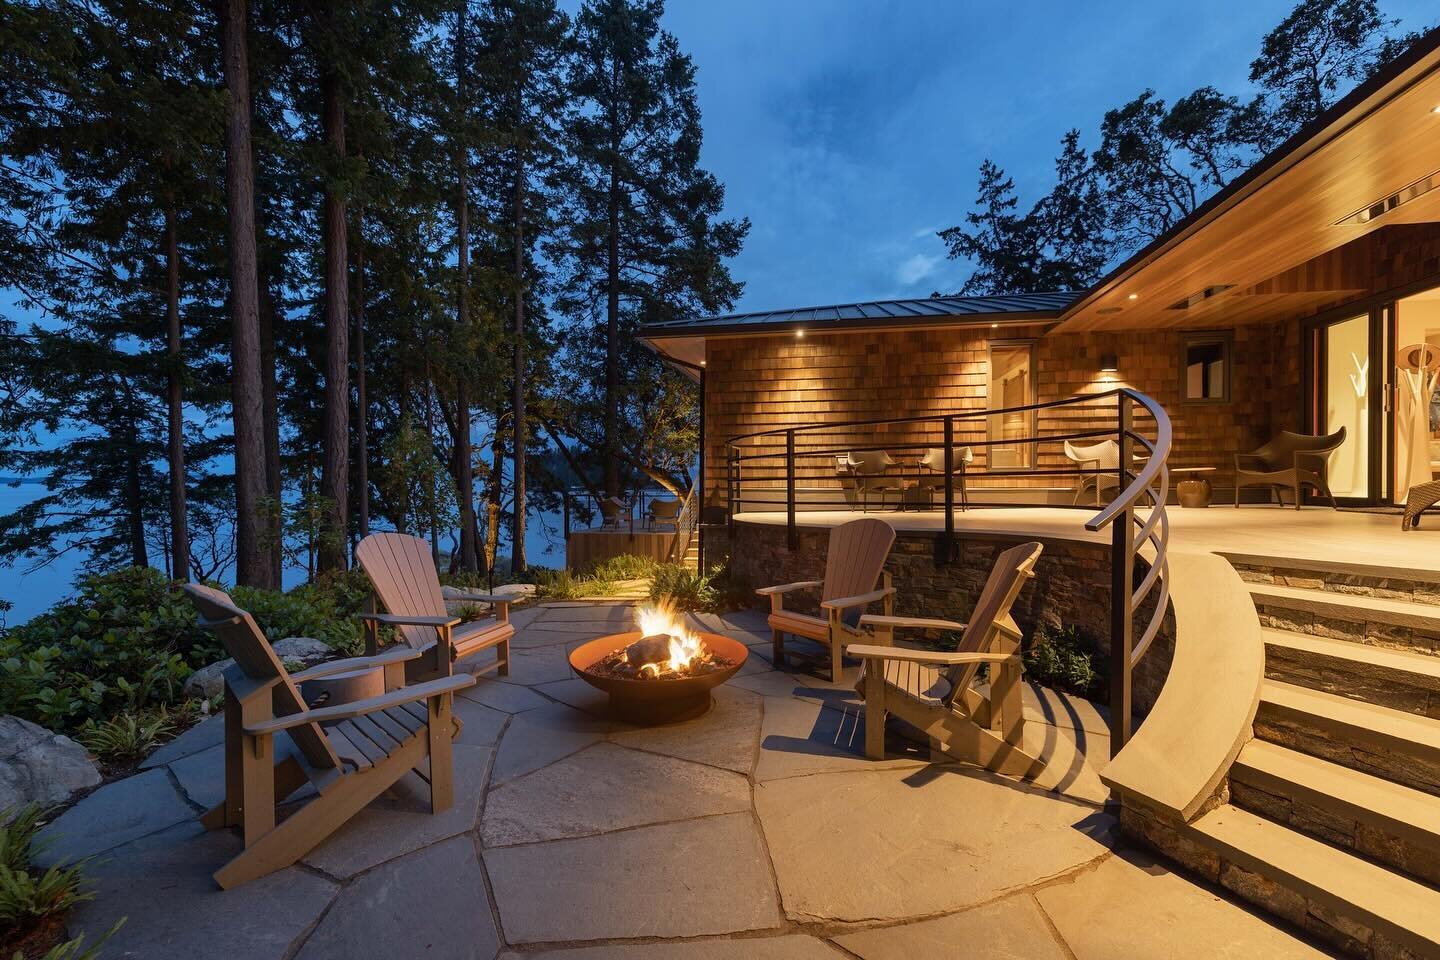 Did you know spending time outdoors can improve your mental well being? Find your sanctuary in the tranquility of nature 🌳 

#outdoors #nature #landscape #landscaping #firepit #outdoorfirepit #landscapelovers #landscapedesign